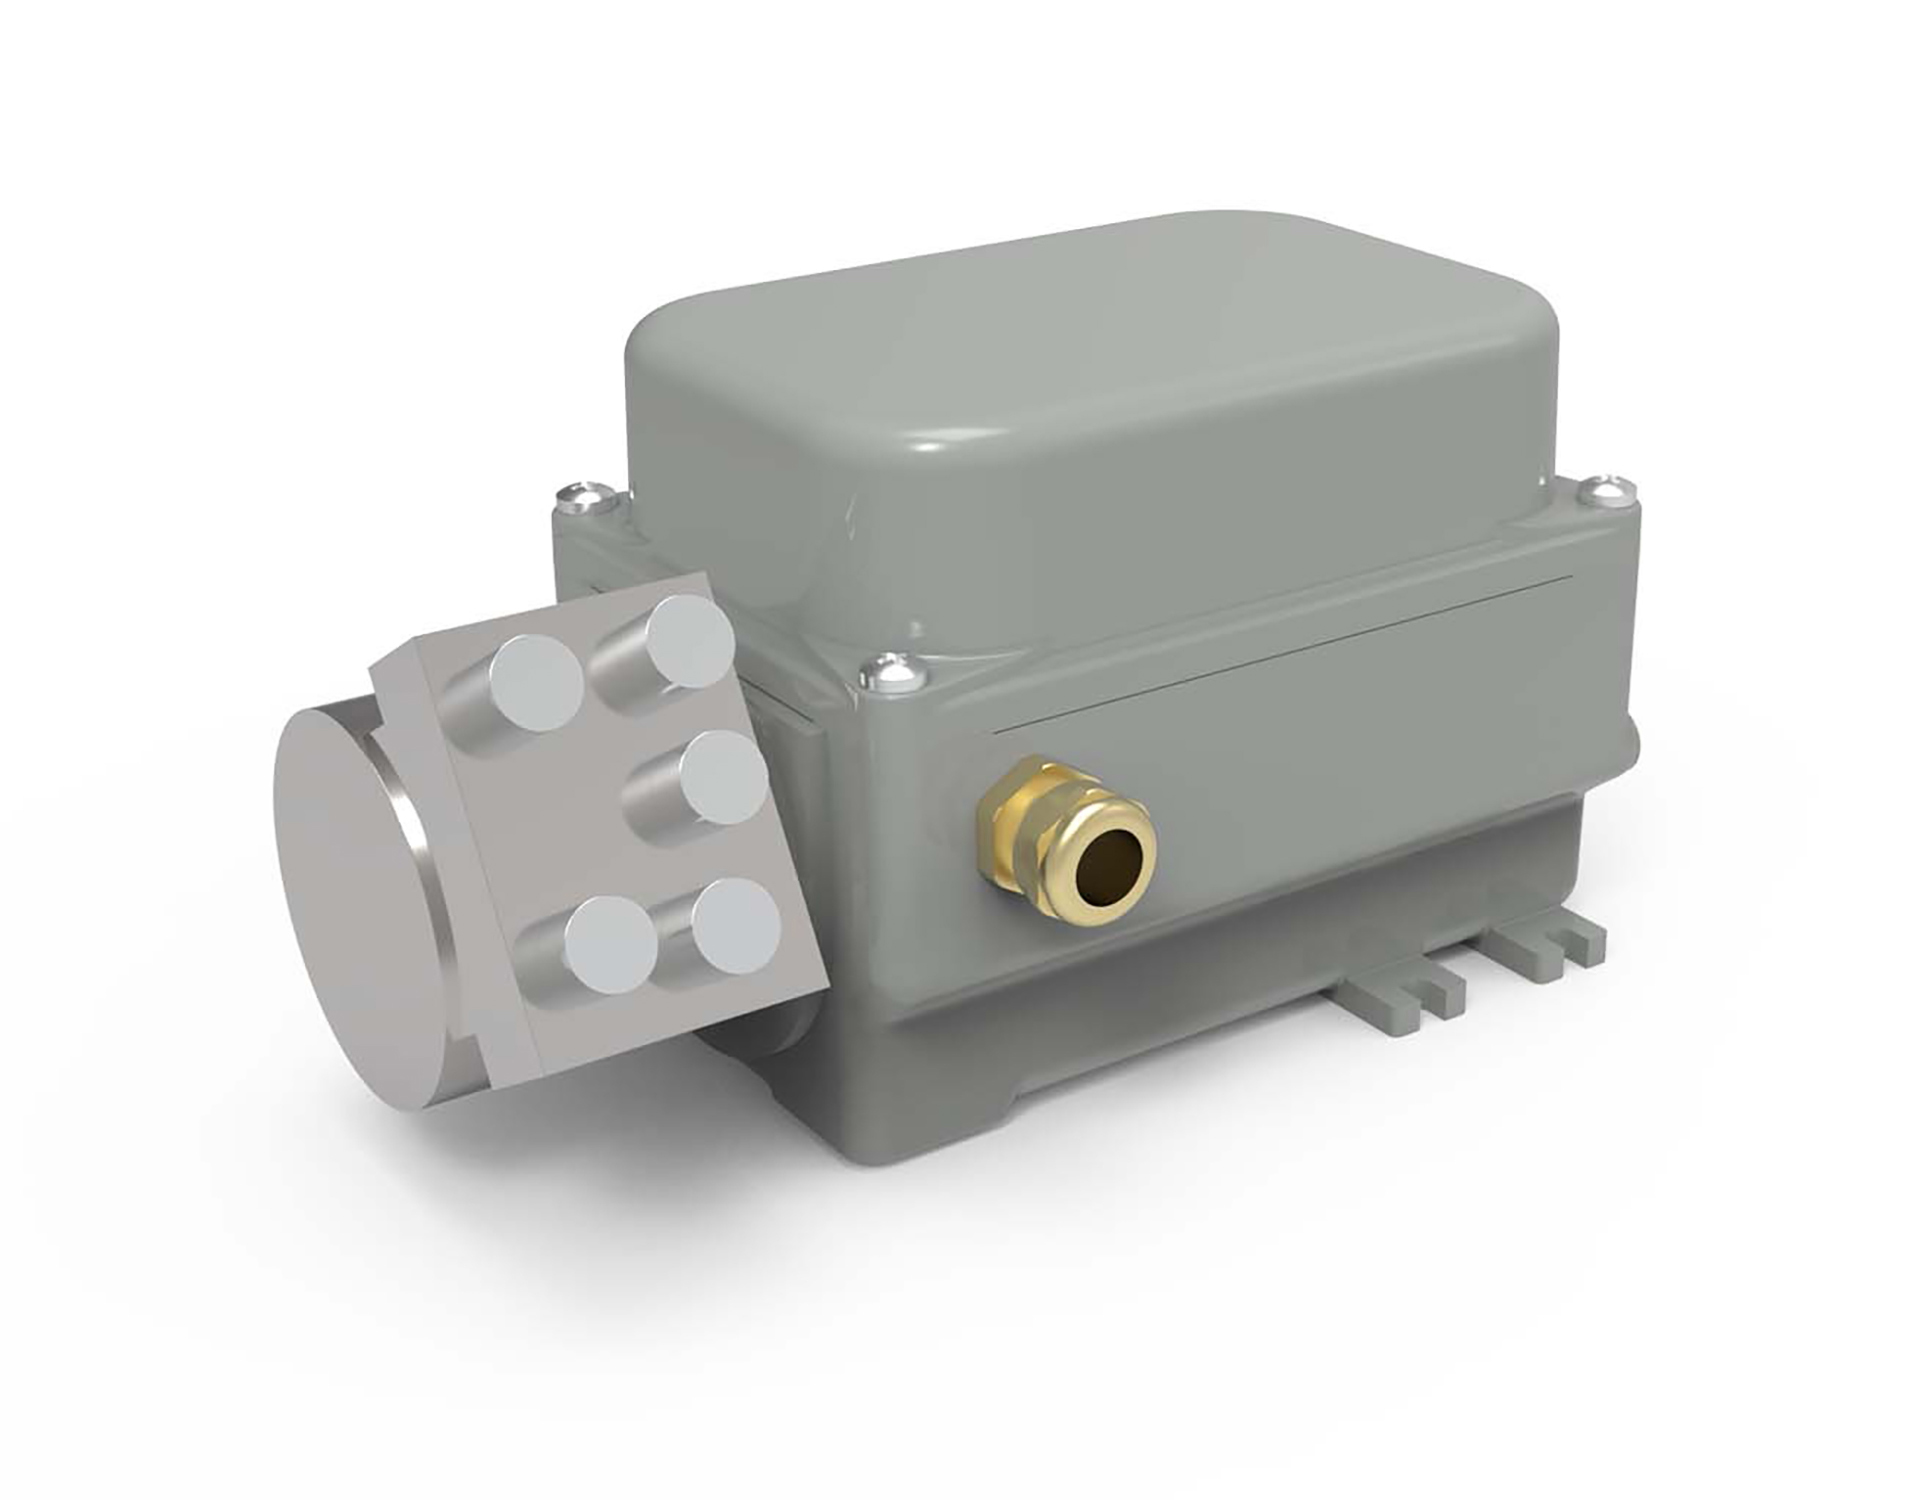 Series 51 geared cam limit switches set the upper and lower stopping points of loads by accurately measuring the number of shaft turns, delivering highly reliable stopping performance.